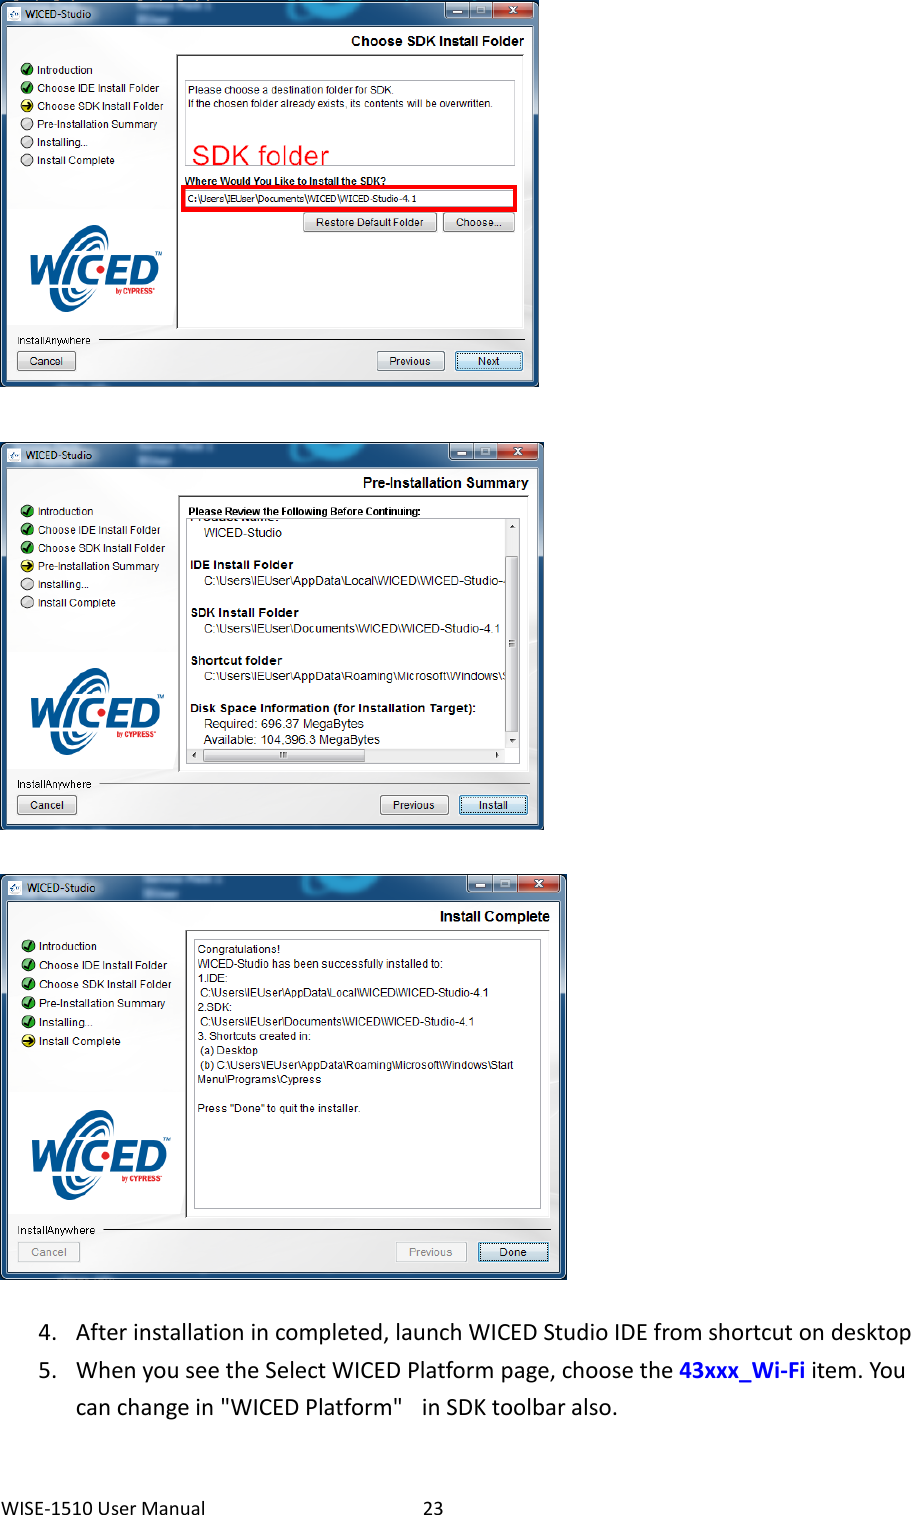 WISE-1510 User Manual  23    4. After installation in completed, launch WICED Studio IDE from shortcut on desktop 5. When you see the Select WICED Platform page, choose the 43xxx_Wi-Fi item. You can change in &quot;WICED Platform&quot;   in SDK toolbar also. 